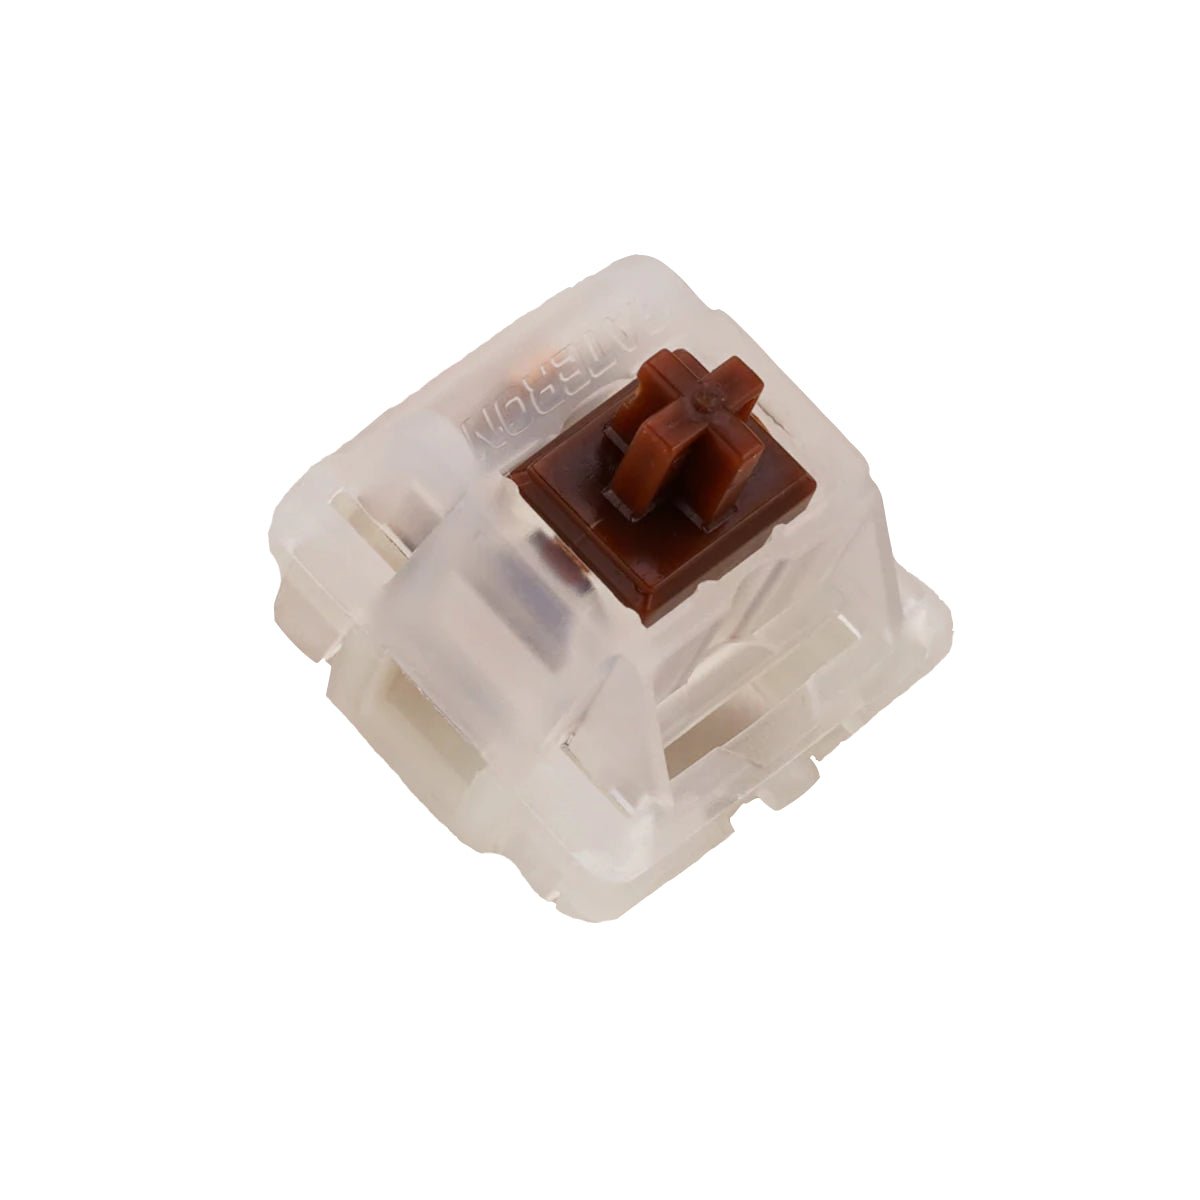 KBD Fans Gateron Caps V2 Tactile Switches - Milky Brown - Store 974 | ستور ٩٧٤